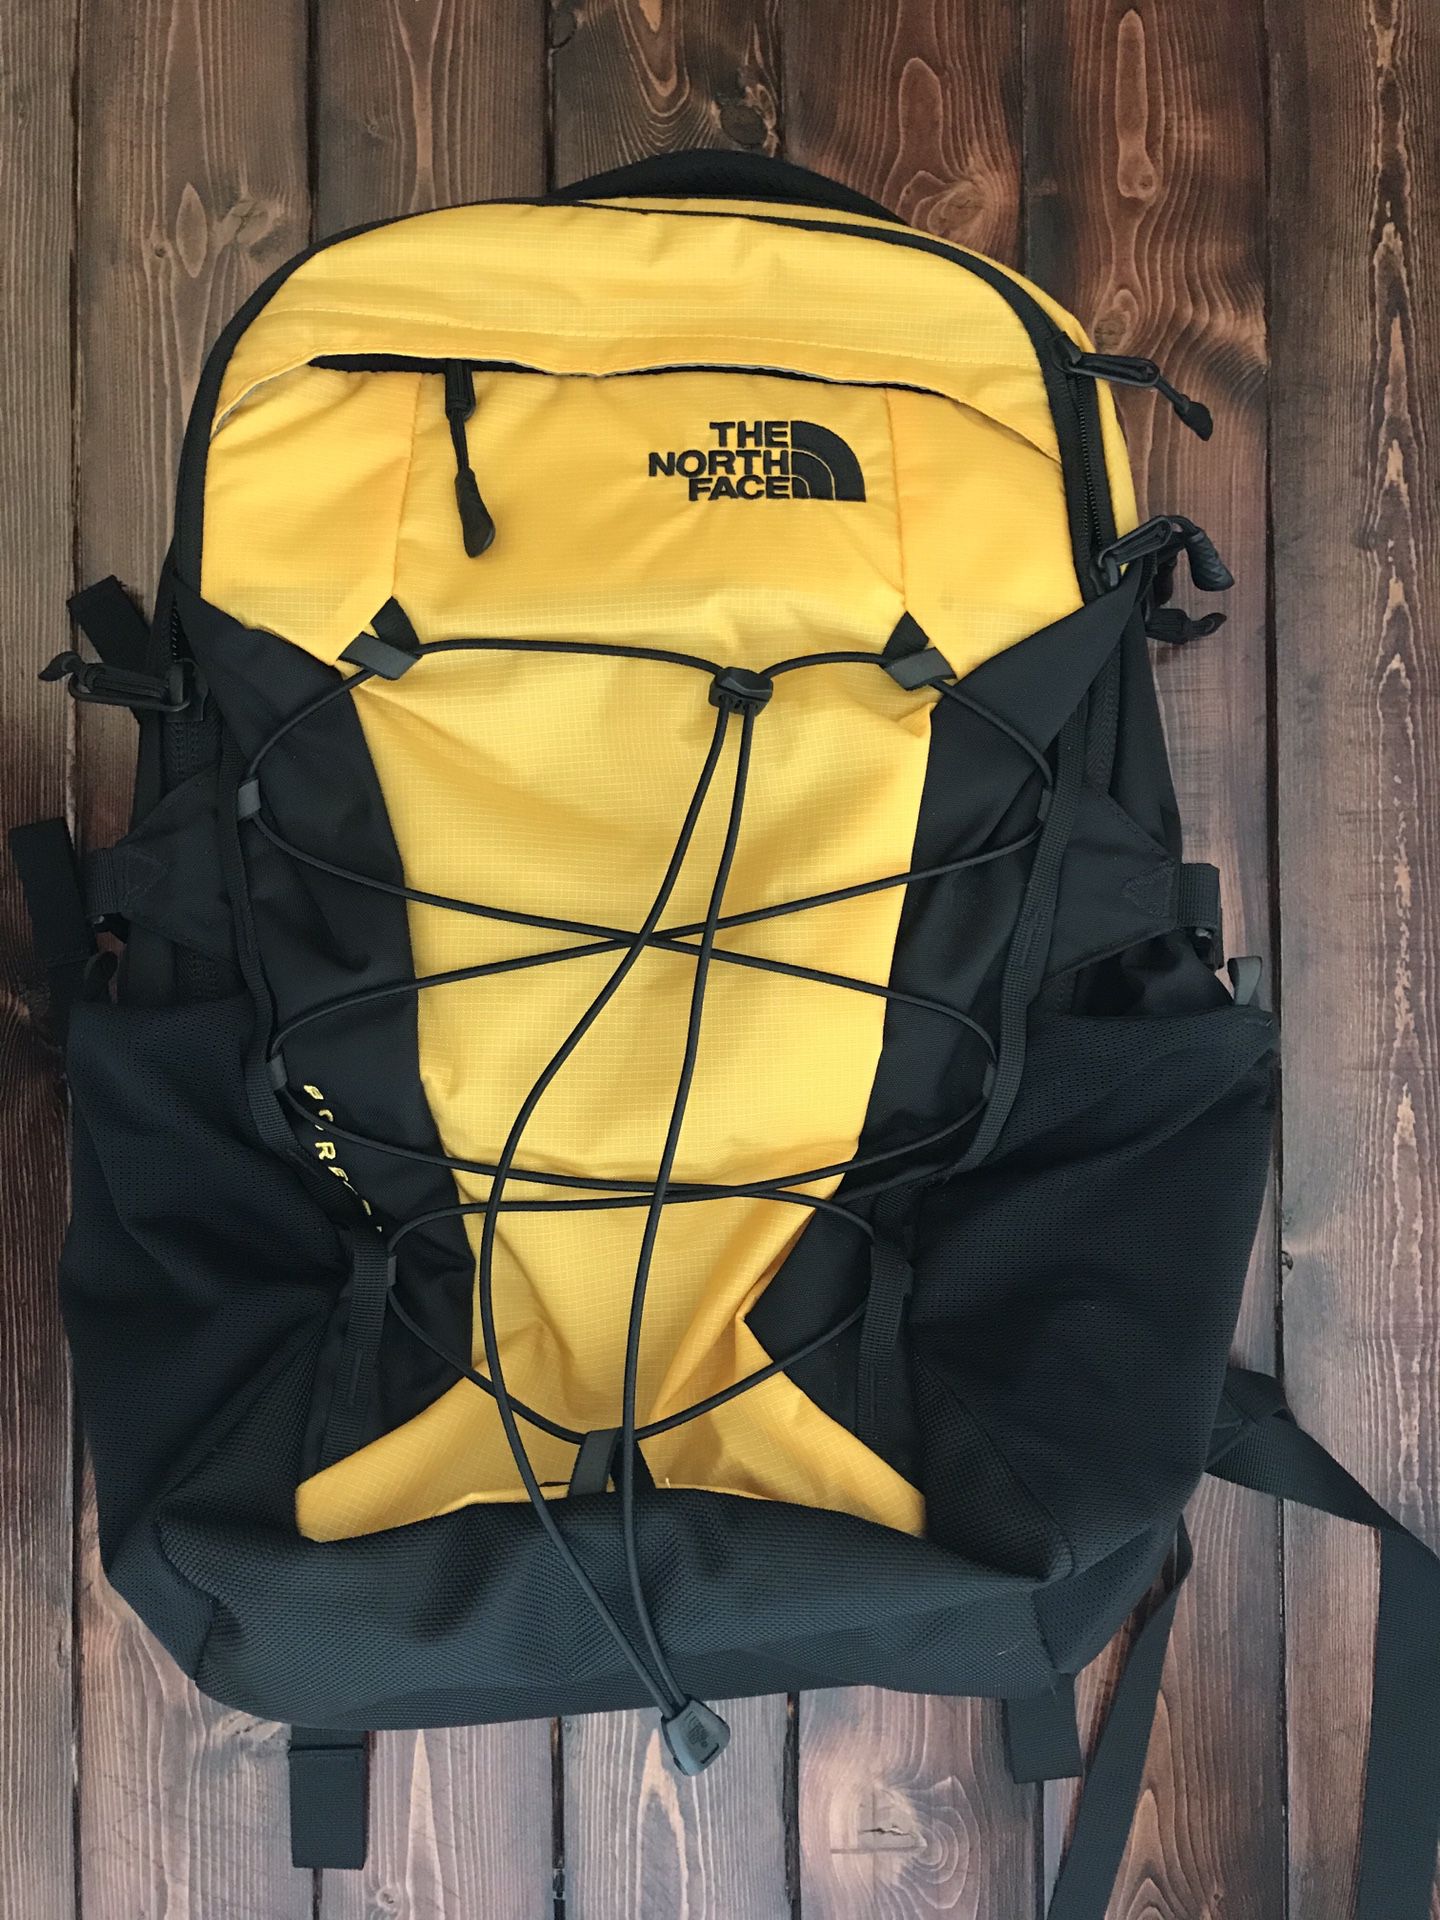 The North Face Borealis Backpack With Flexvent Back Frame (Never Used)